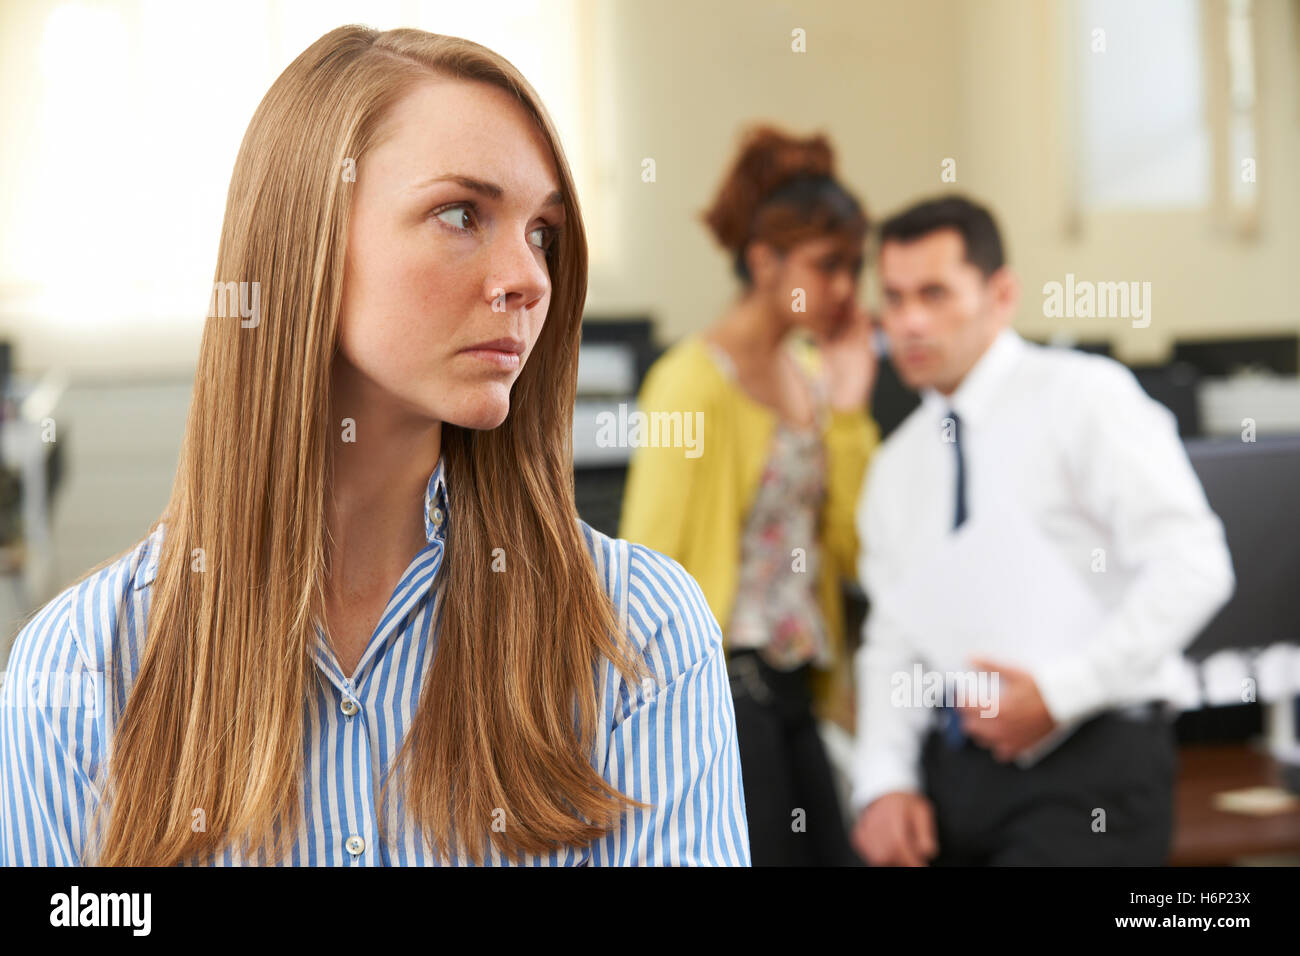 Businesswoman Being Gossiped About By Colleagues In Office Stock Photo